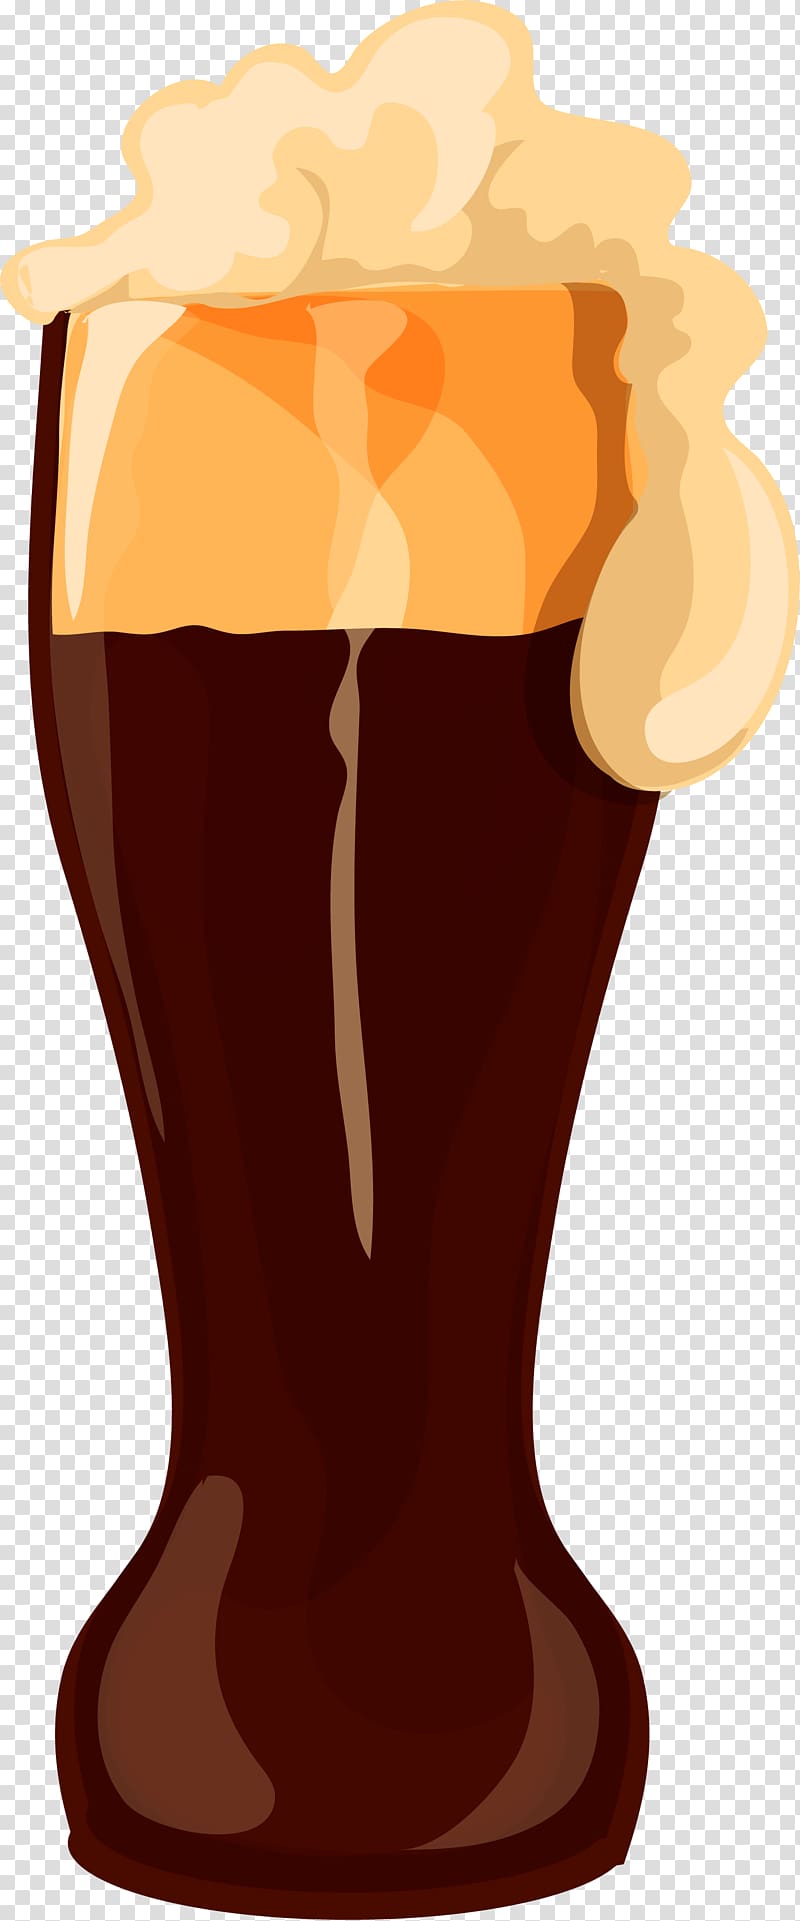 Beer Tankard, Hand drawn Brown beer glass transparent background PNG clipart